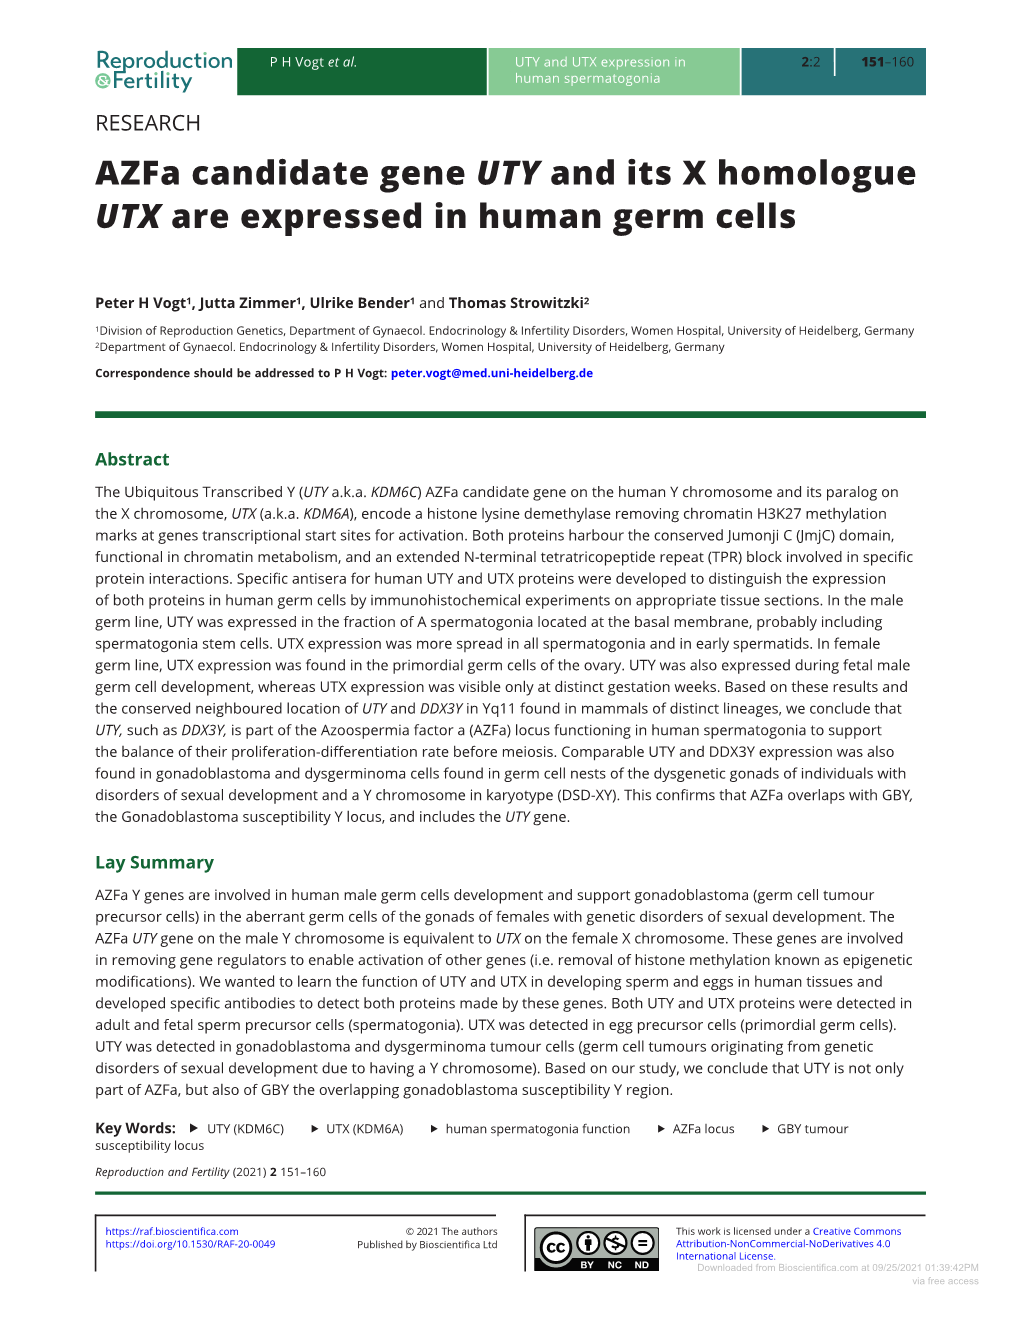 Azfa Candidate Gene UTY and Its X Homologue UTX Are Expressed in Human Germ Cells